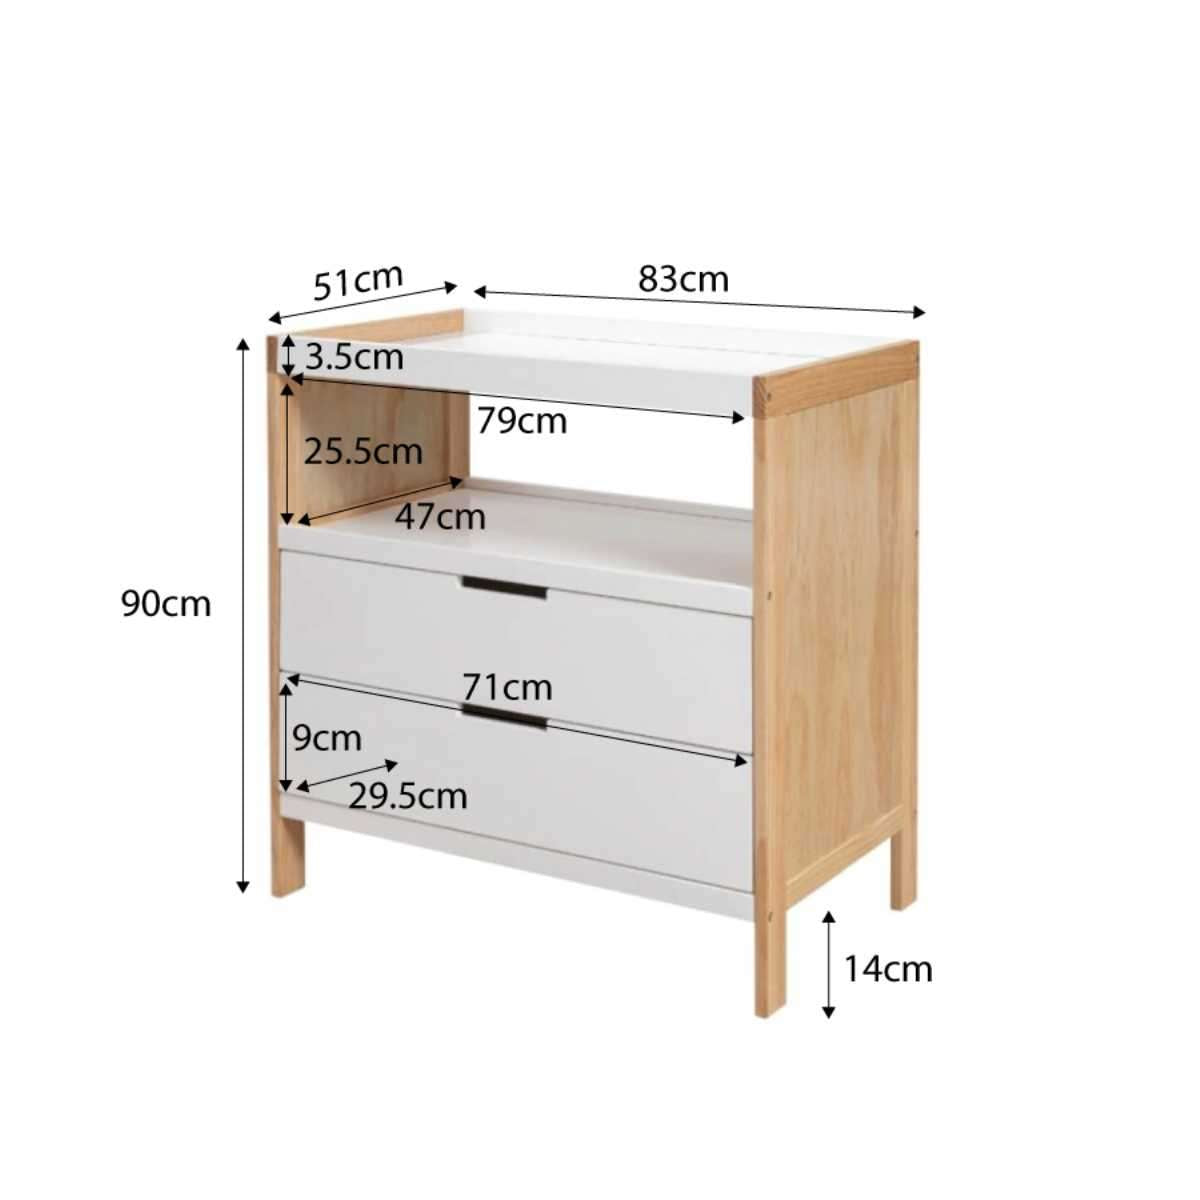 Aspiring Change Table with Drawers - White/Natural